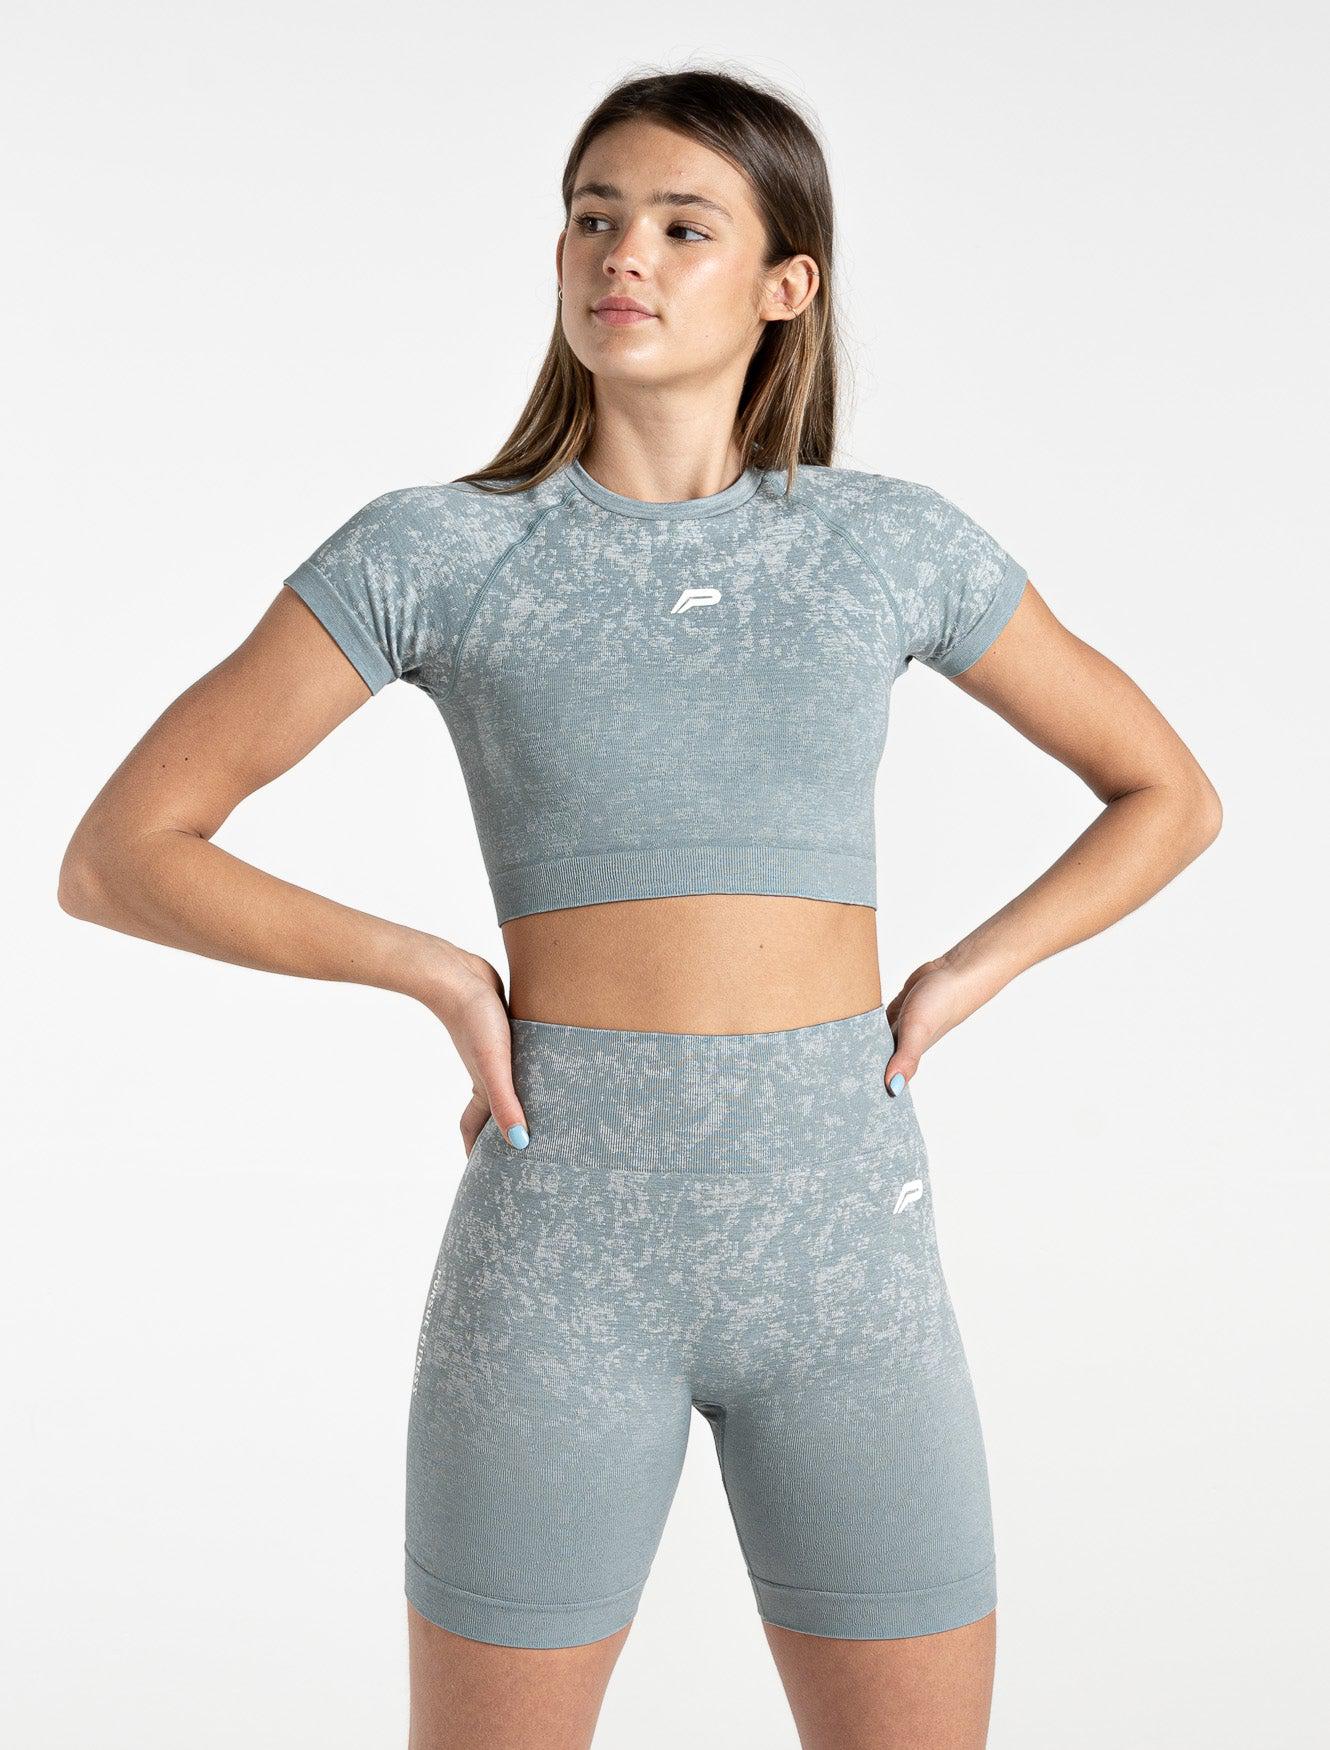 Cosmic Seamless Crop Top / Teal Ombre Pursue Fitness 1